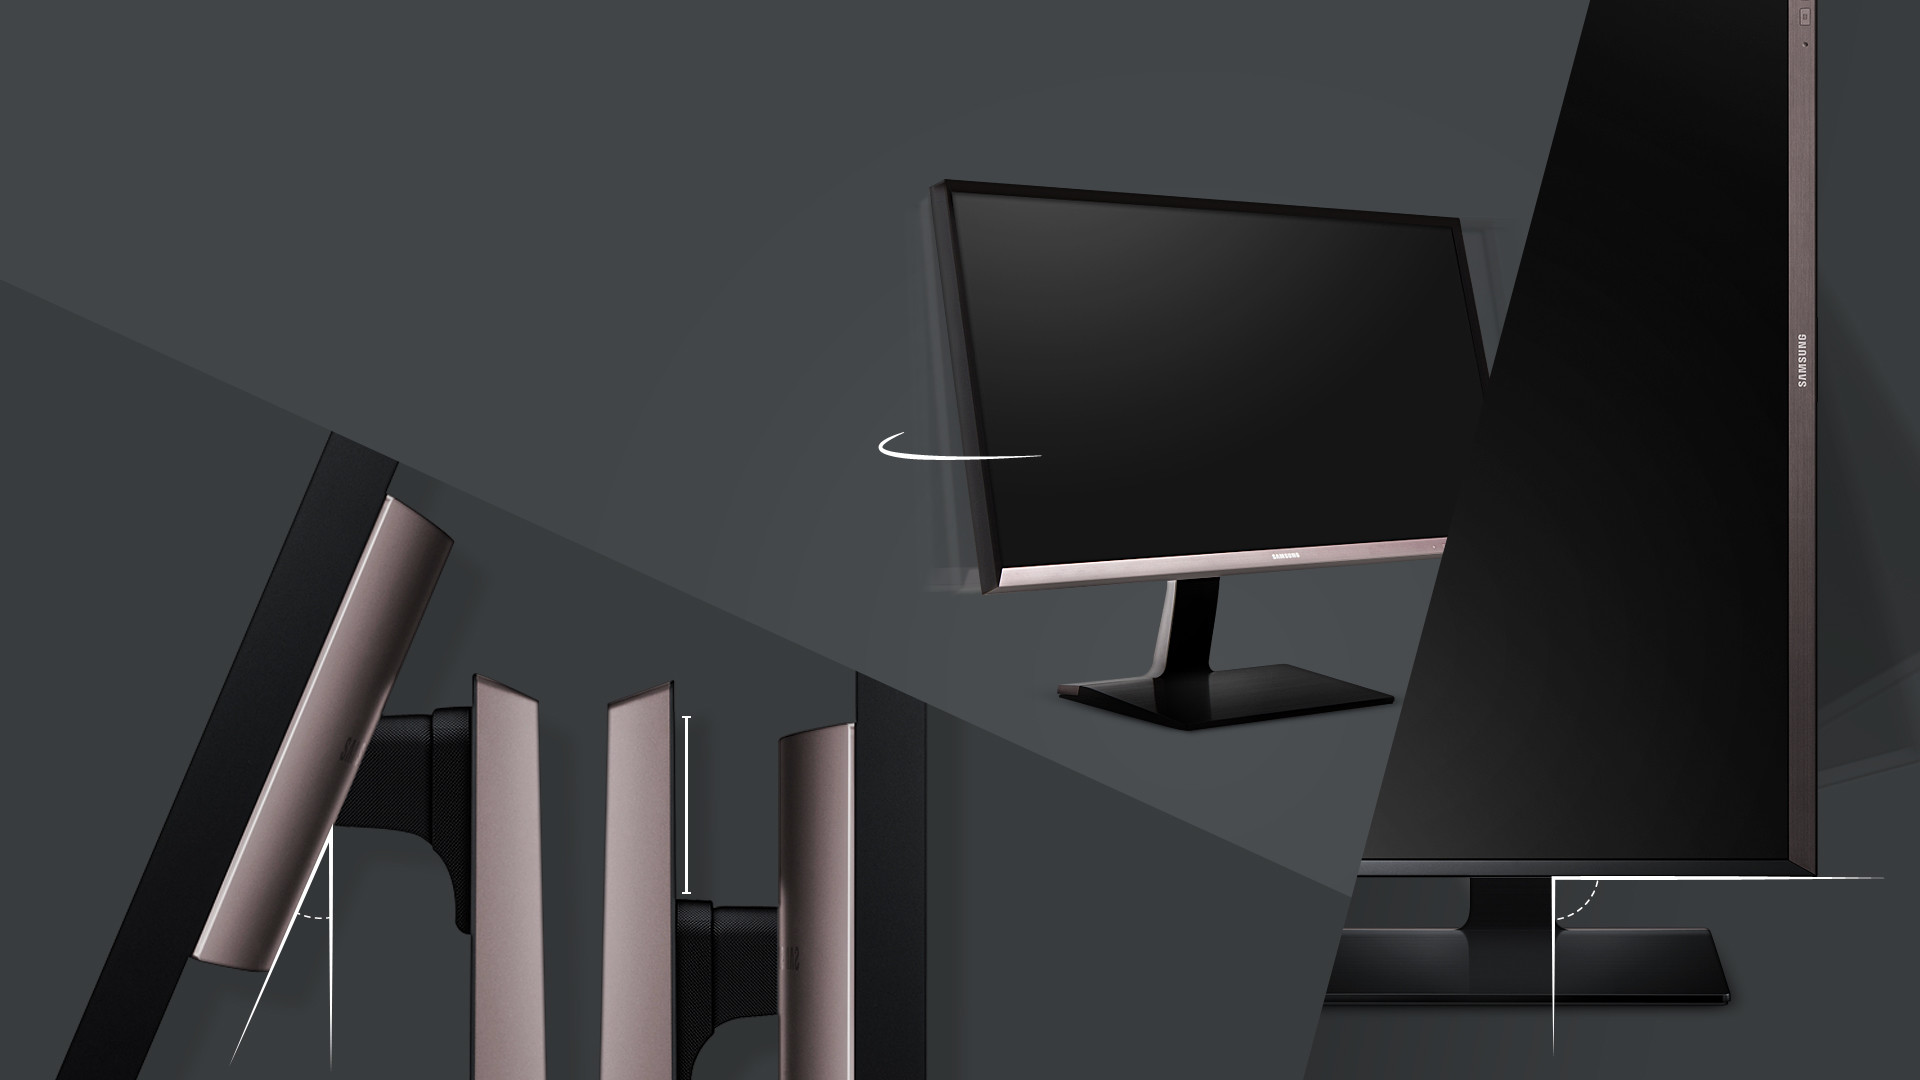 1920x1080 A professional ergonomic monitor for truly professional needs